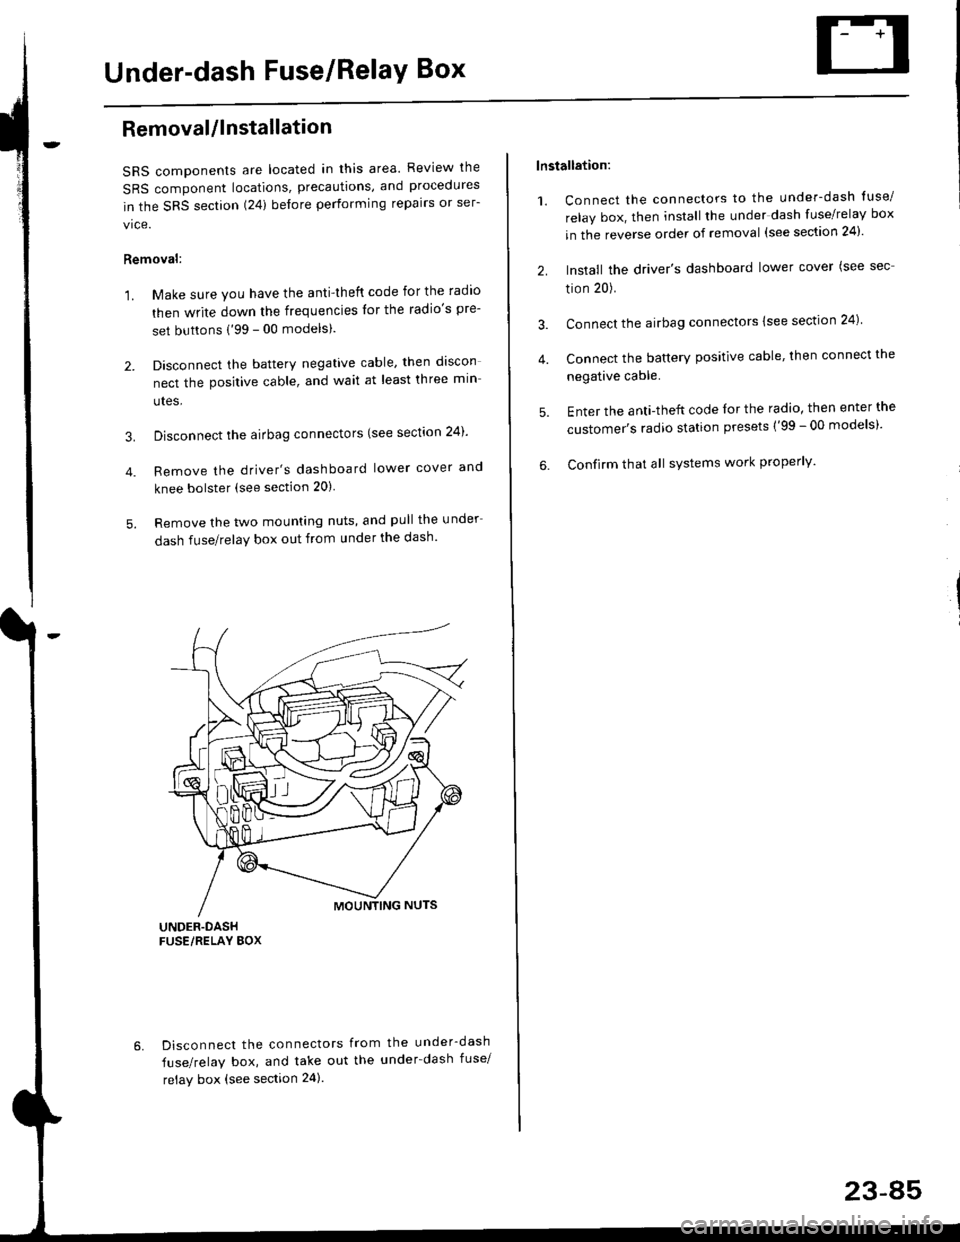 HONDA CIVIC 1999 6.G Workshop Manual Under-dash Fuse/RelaY Box
Removal/lnstallation
SRS components are located in this area. Review lhe
SRS component locations, precautions, and procedures
in the SRS section (24) before performing repair